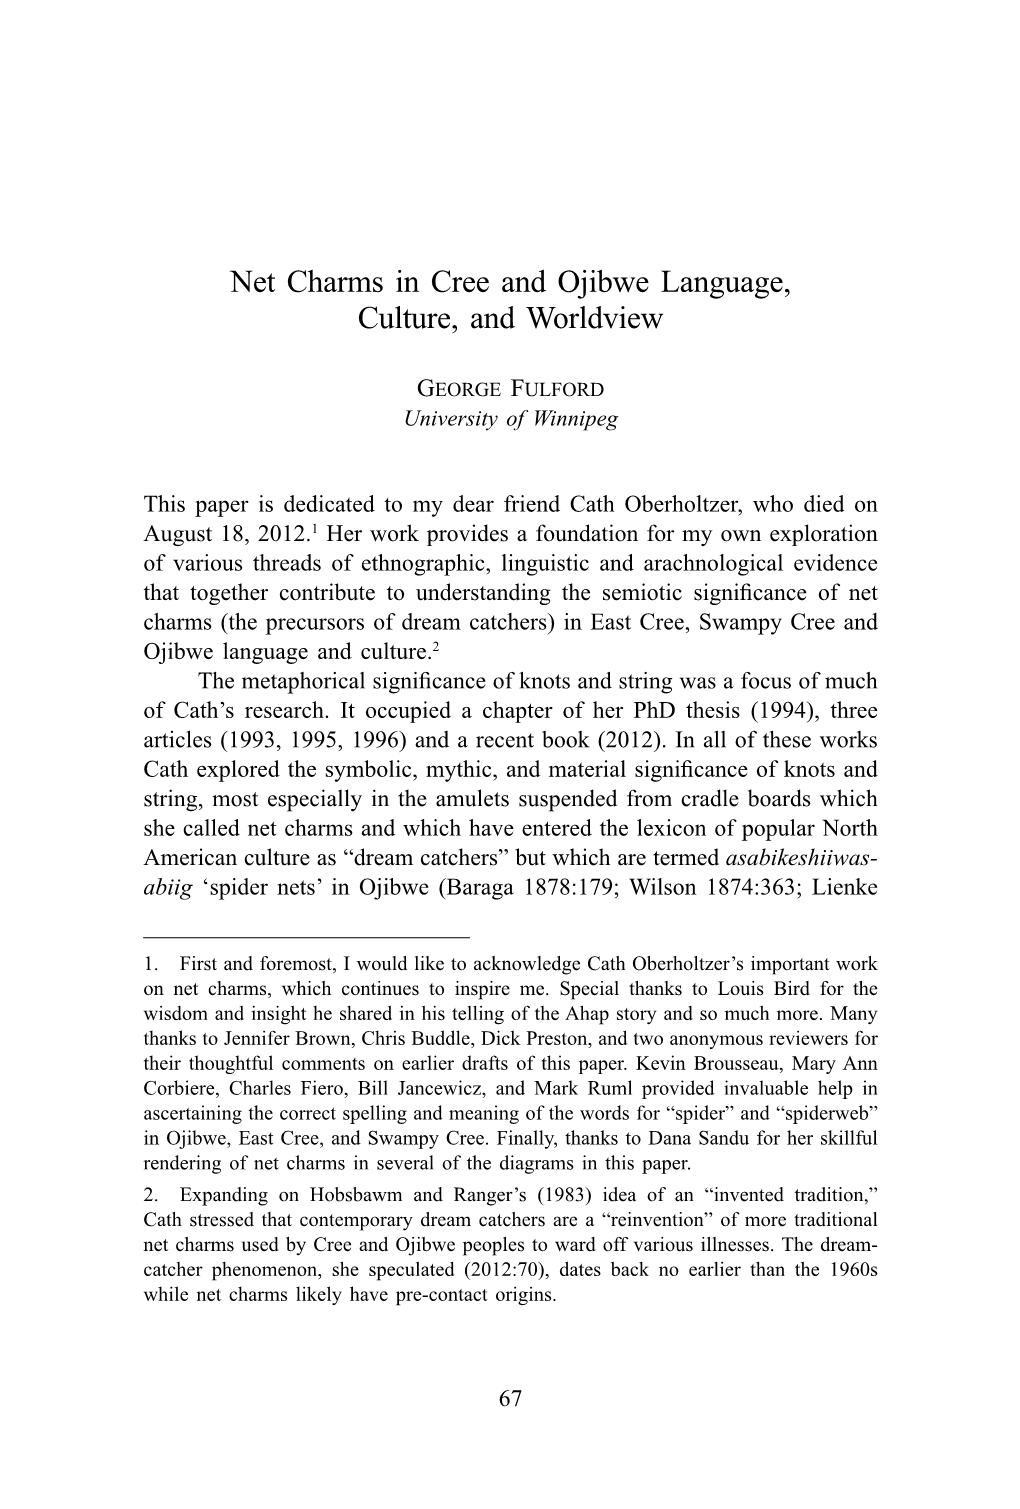 Net Charms in Cree and Ojibwe Language, Culture, and Worldview